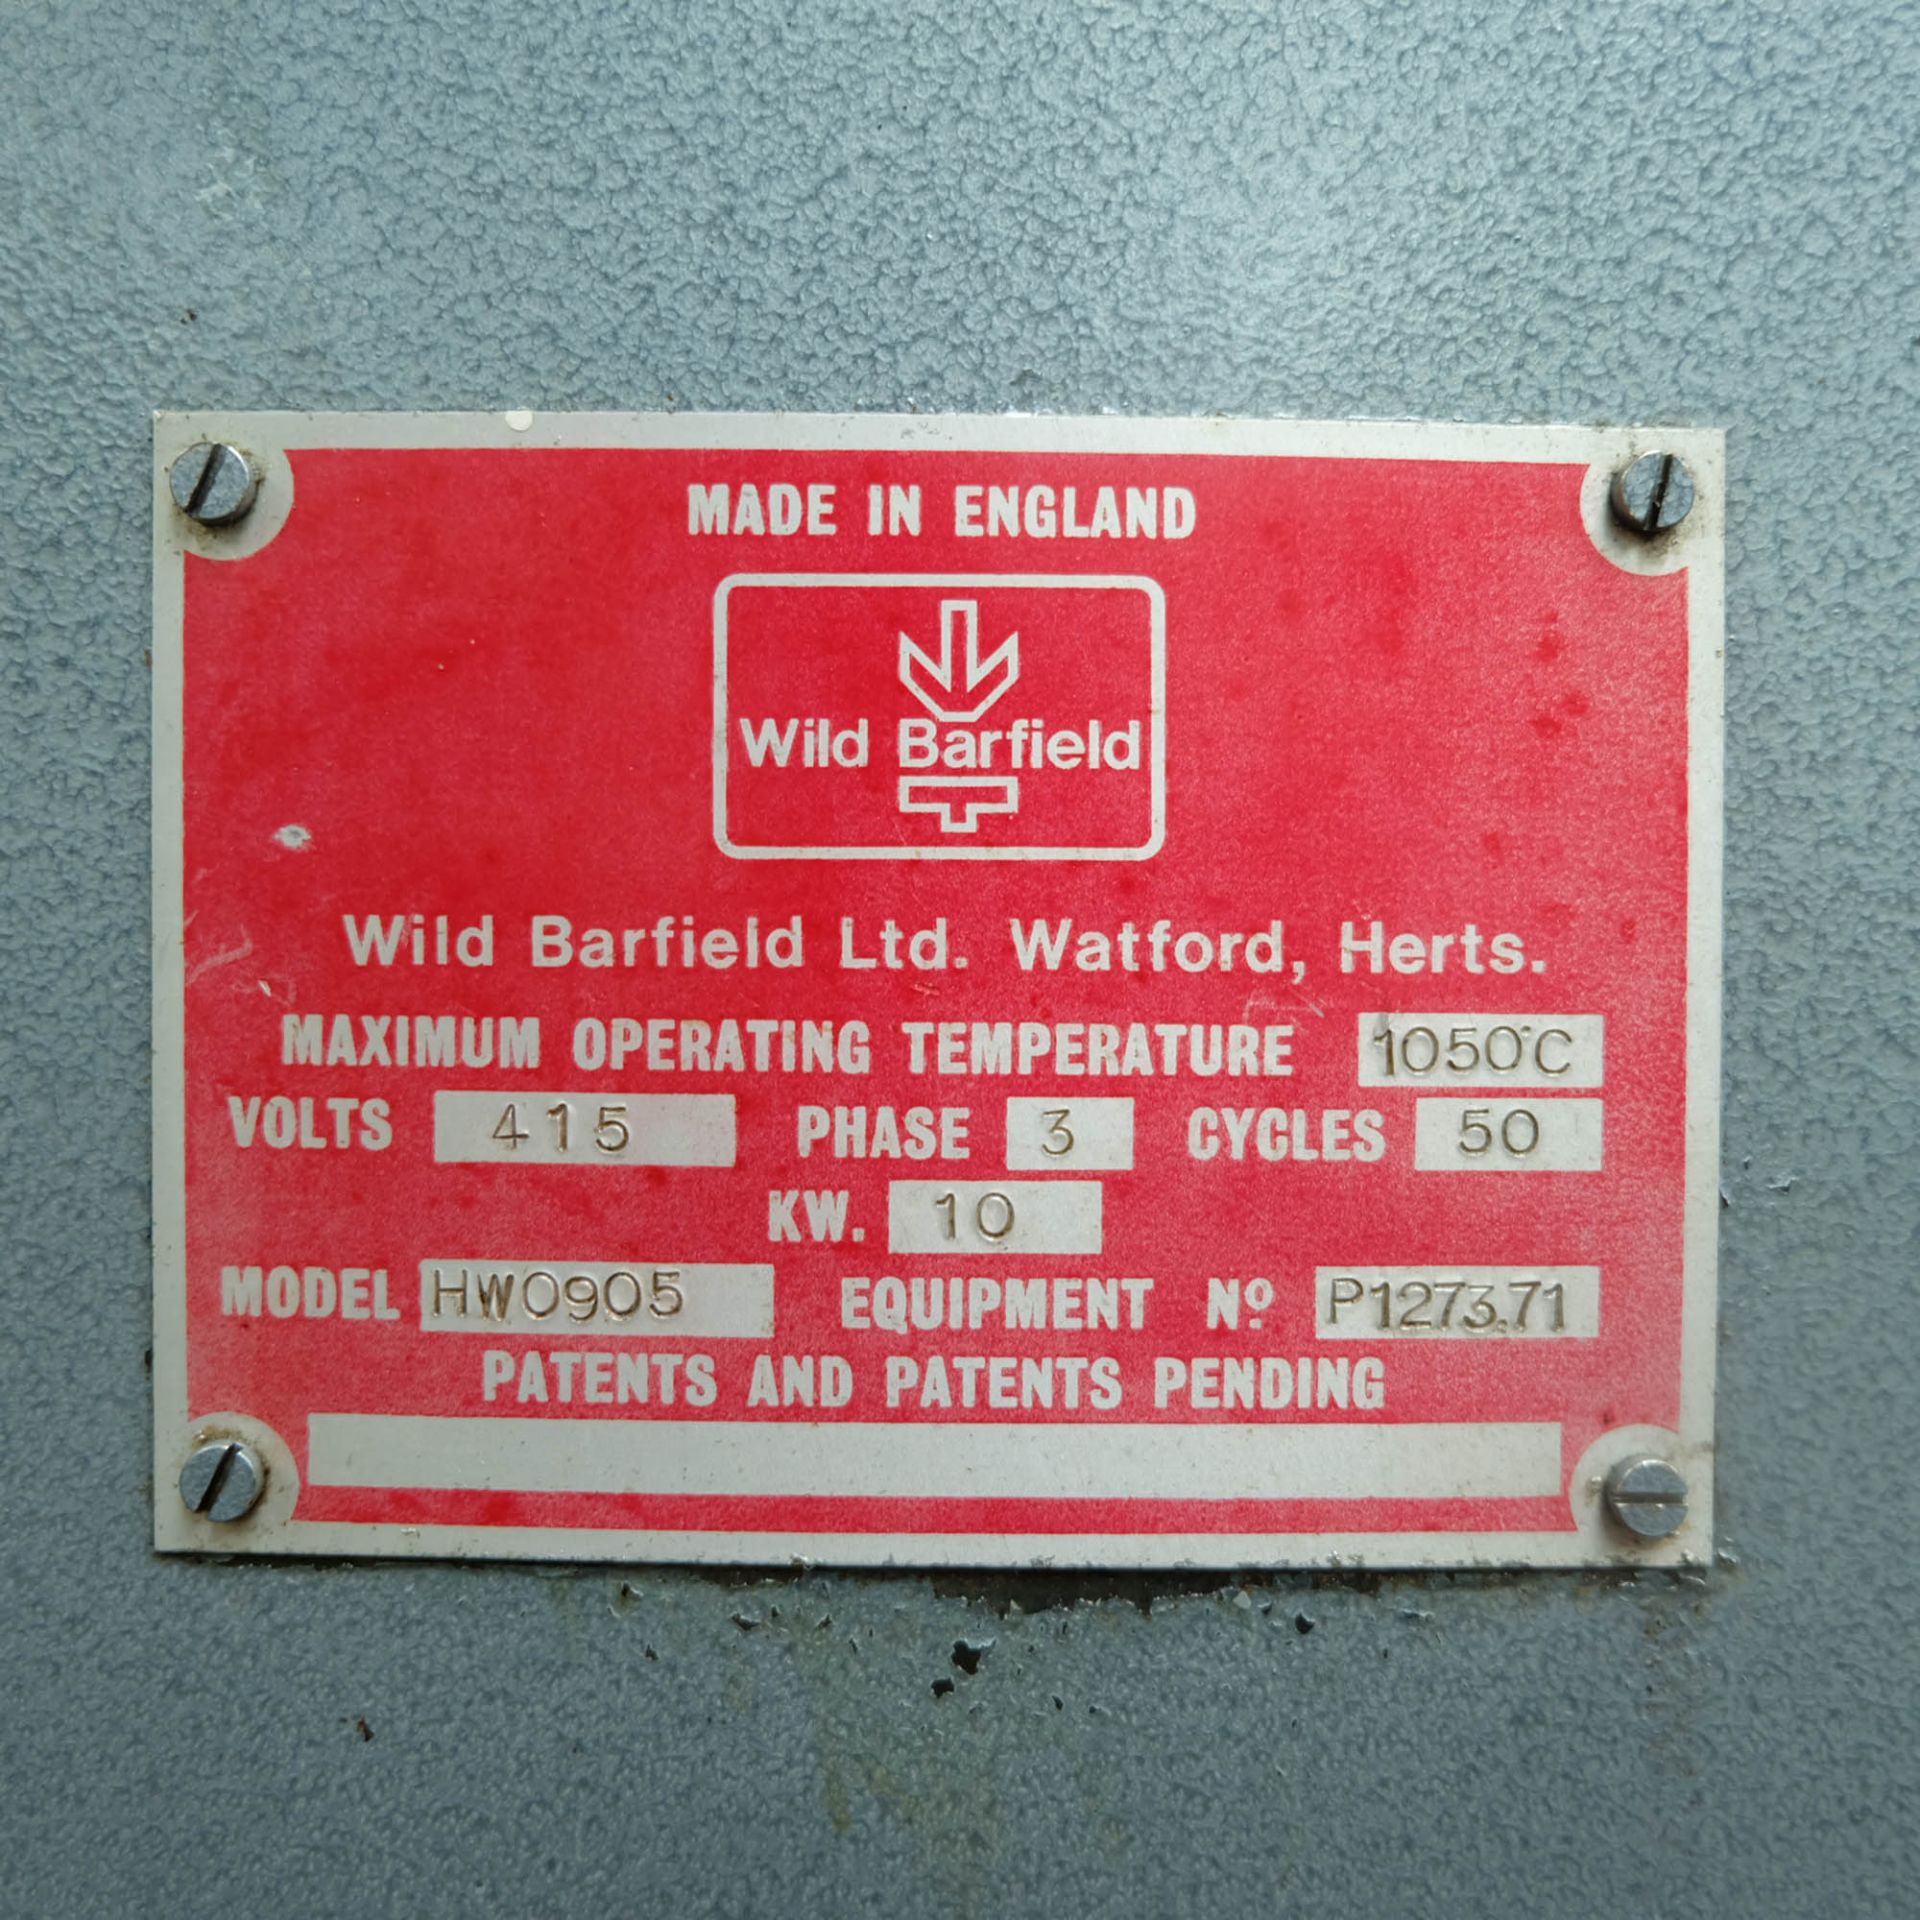 Wild Barfield Model HW 0905. Electric Brick Lined Oven. - Image 7 of 7